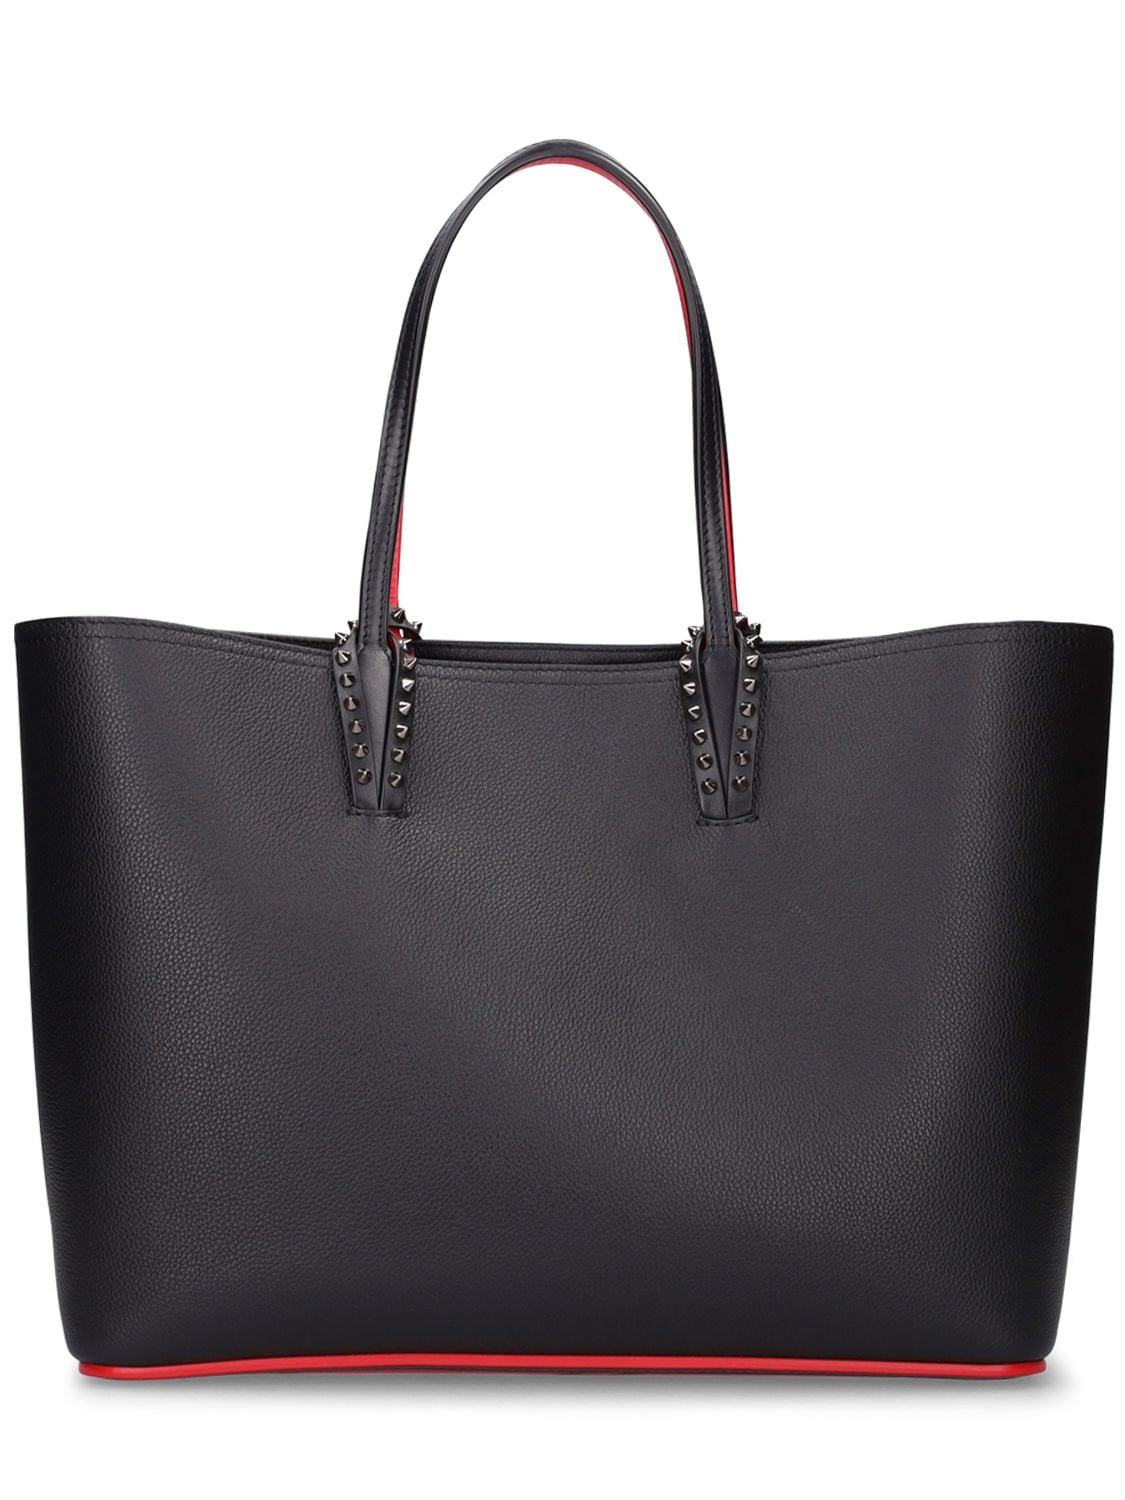 Image of Cabata Grained Leather Tote Bag